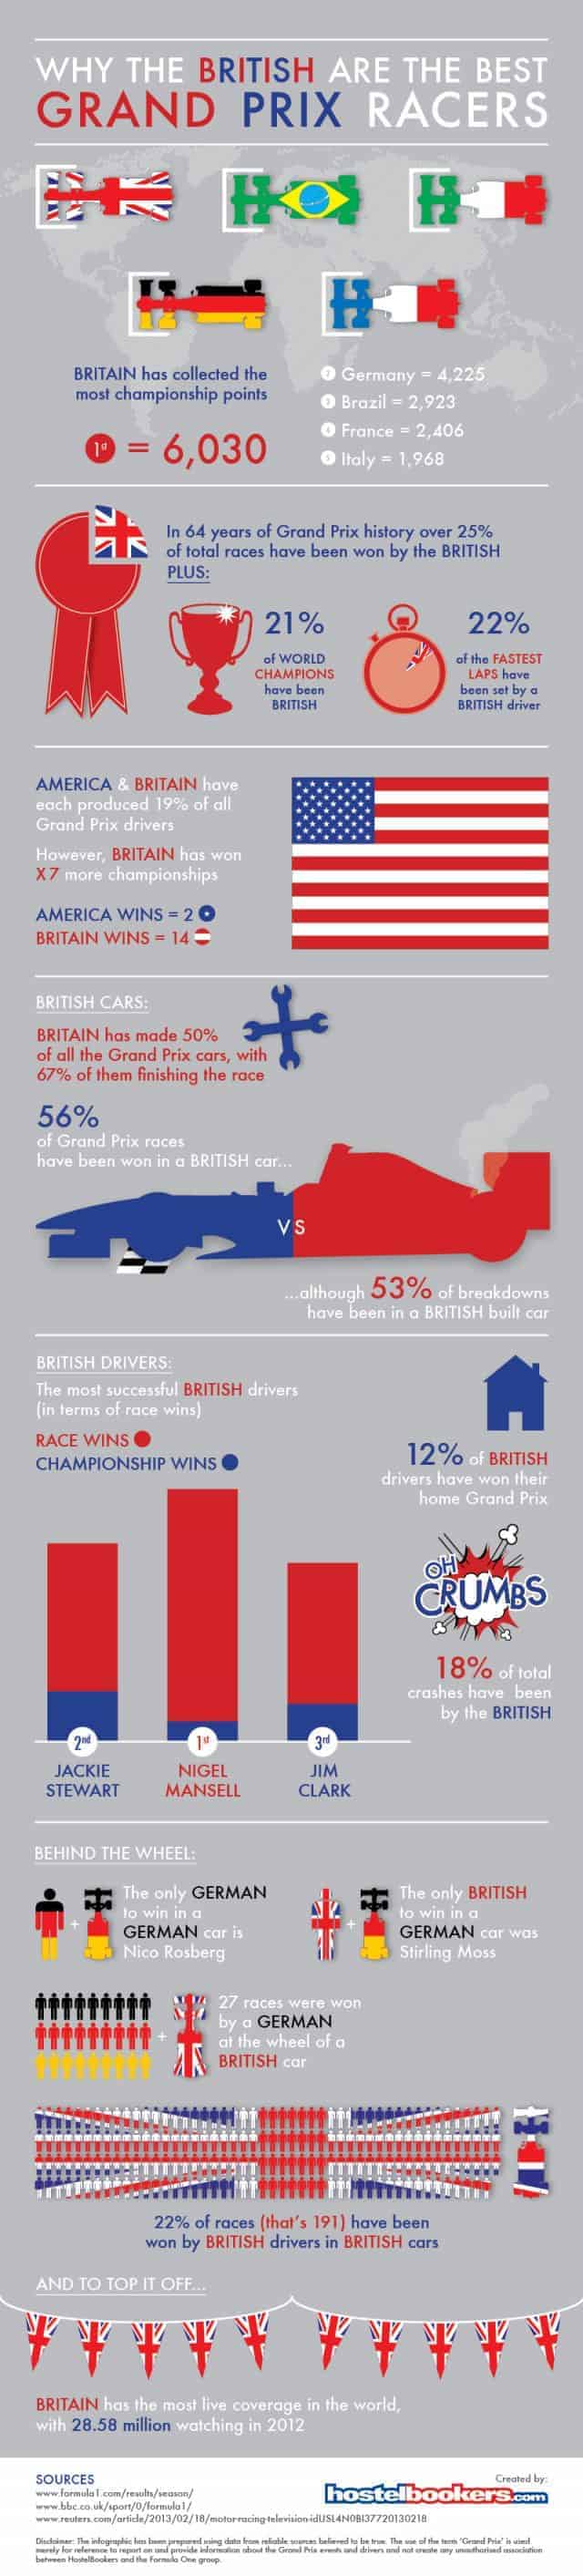 Why British Are The Best Grand Prix Racers